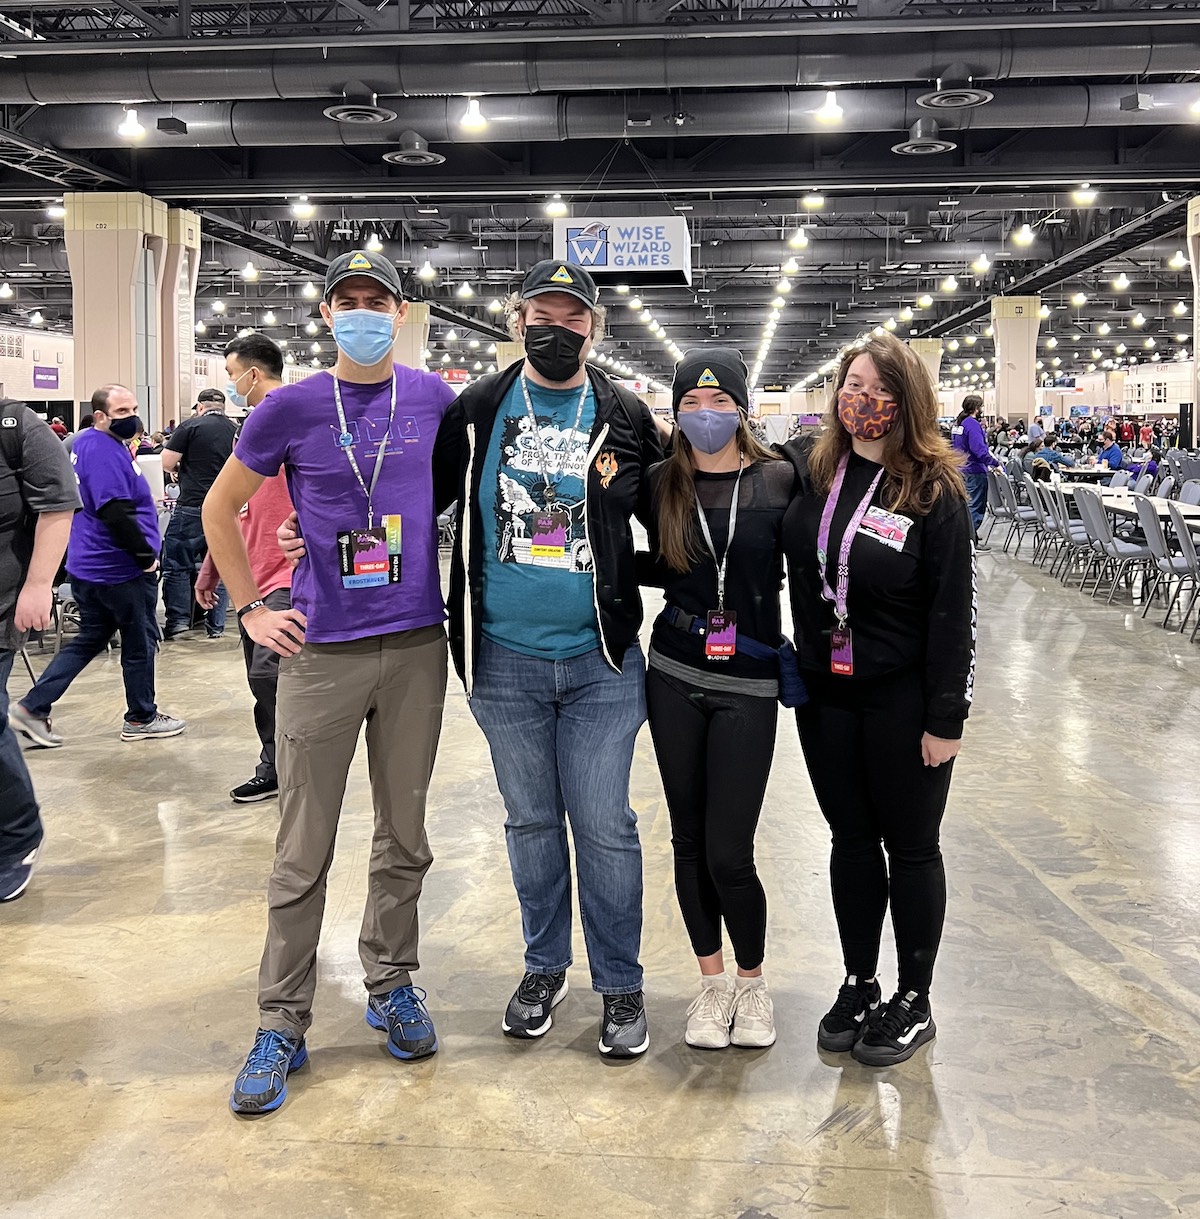 PAX Unplugged 2021: Bringing Games & Community Together